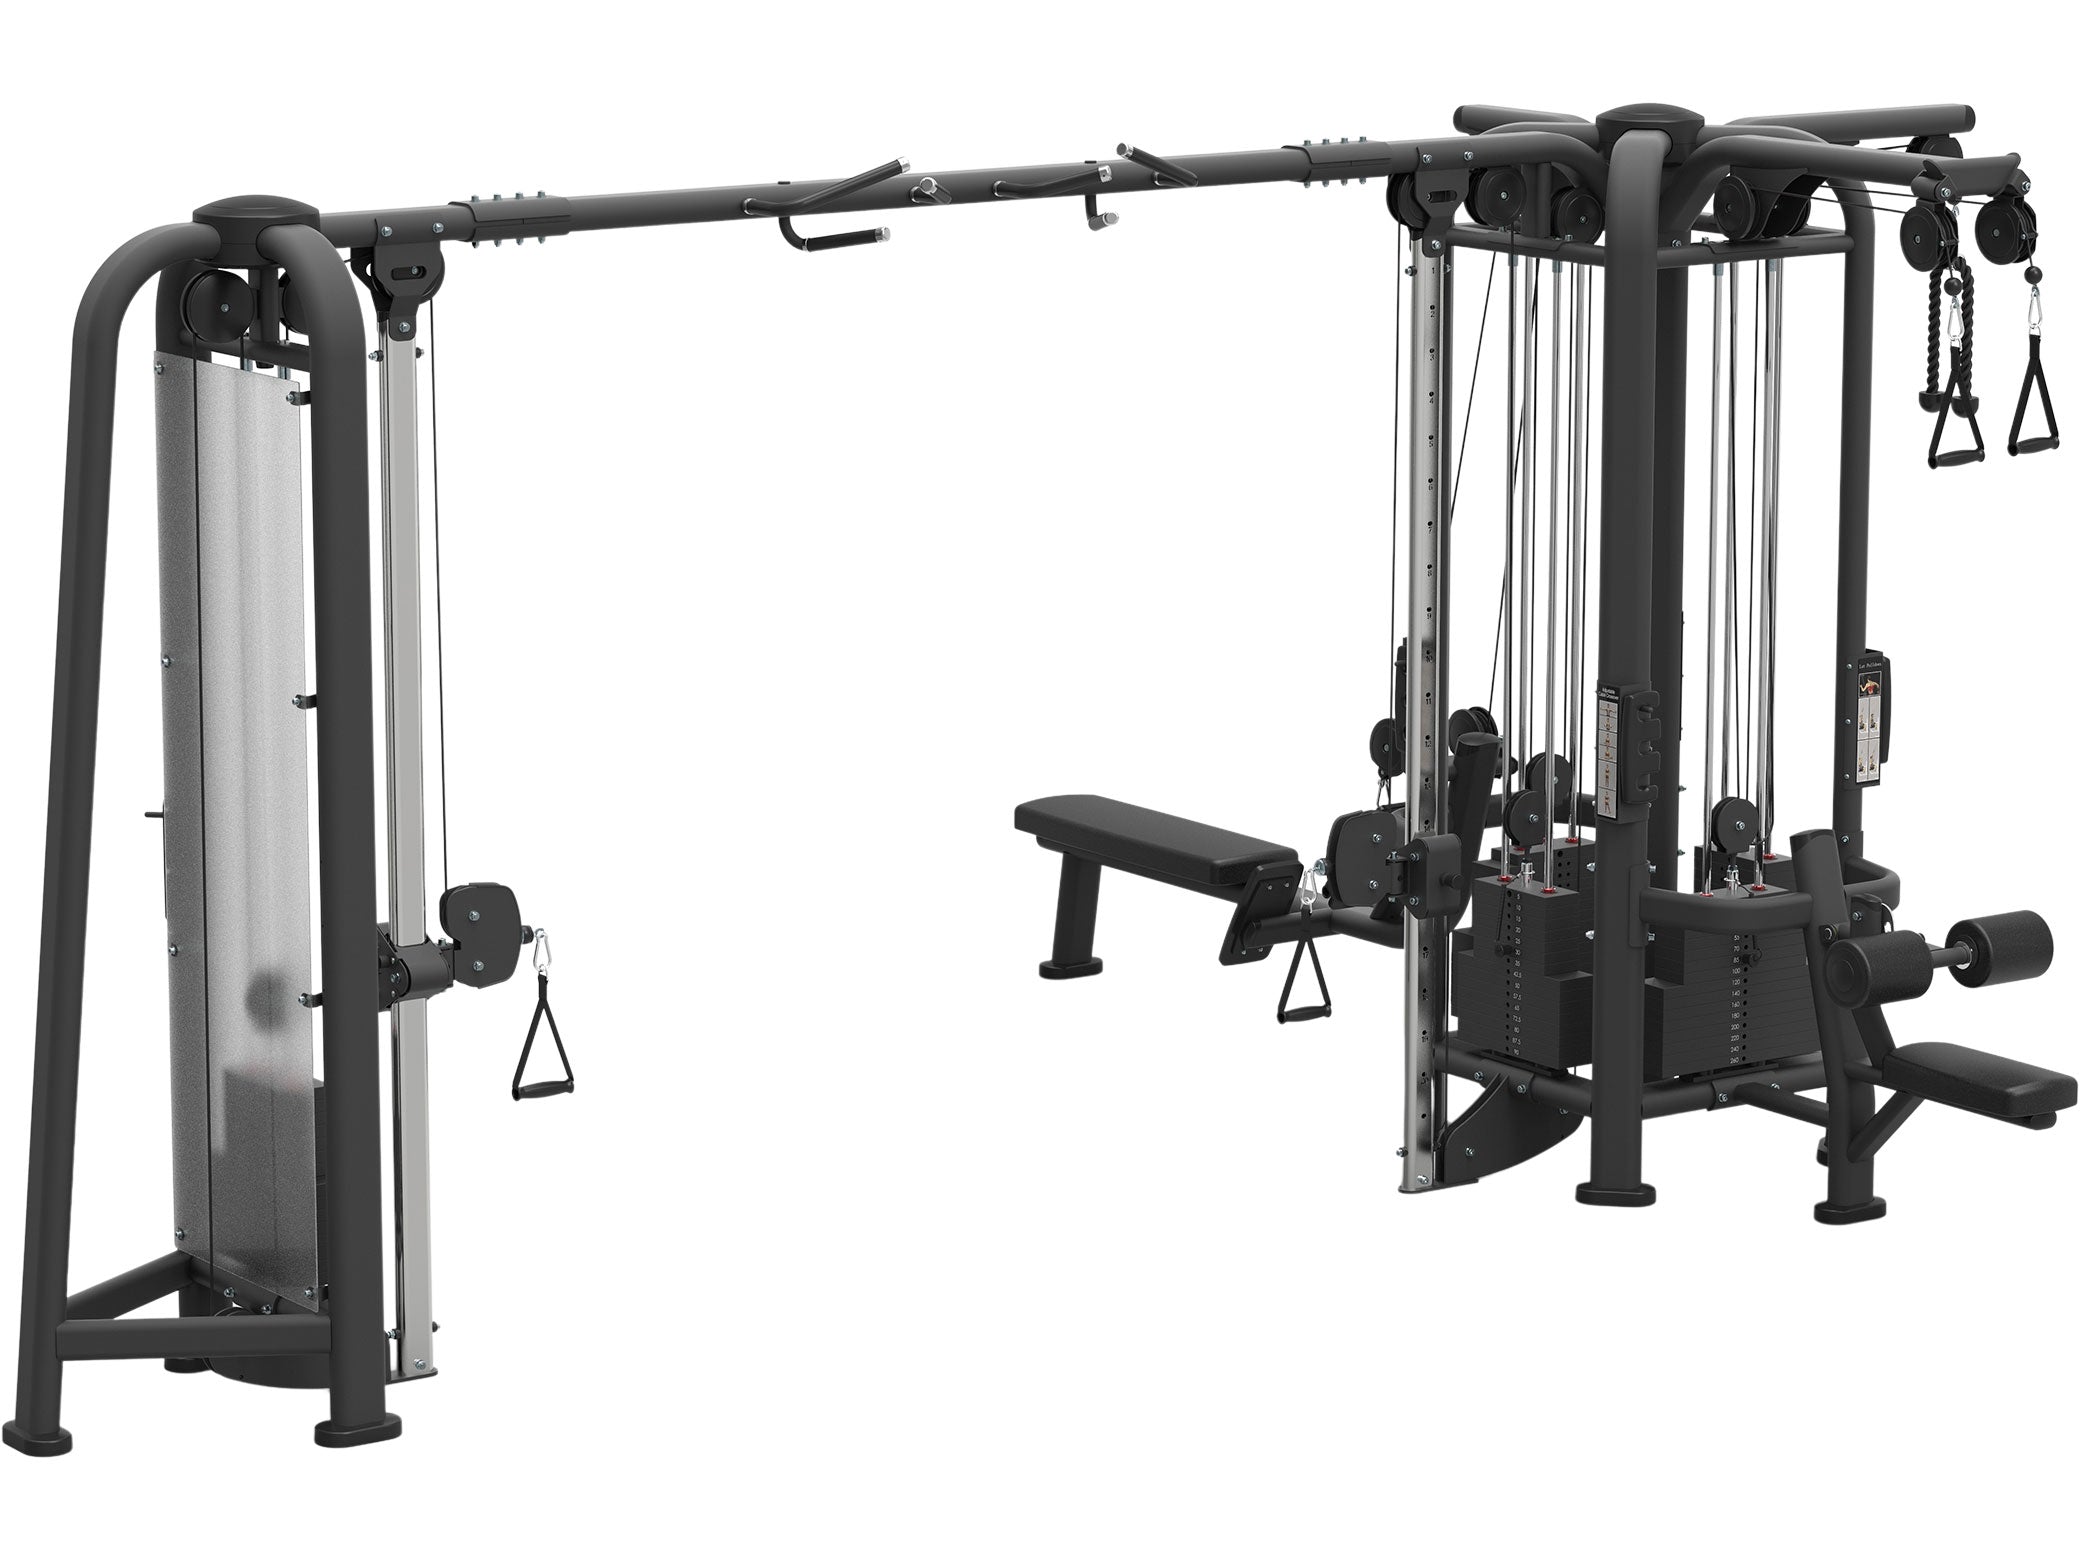 Sportgear MJ5 with Dual Pulley Pulldown and Row